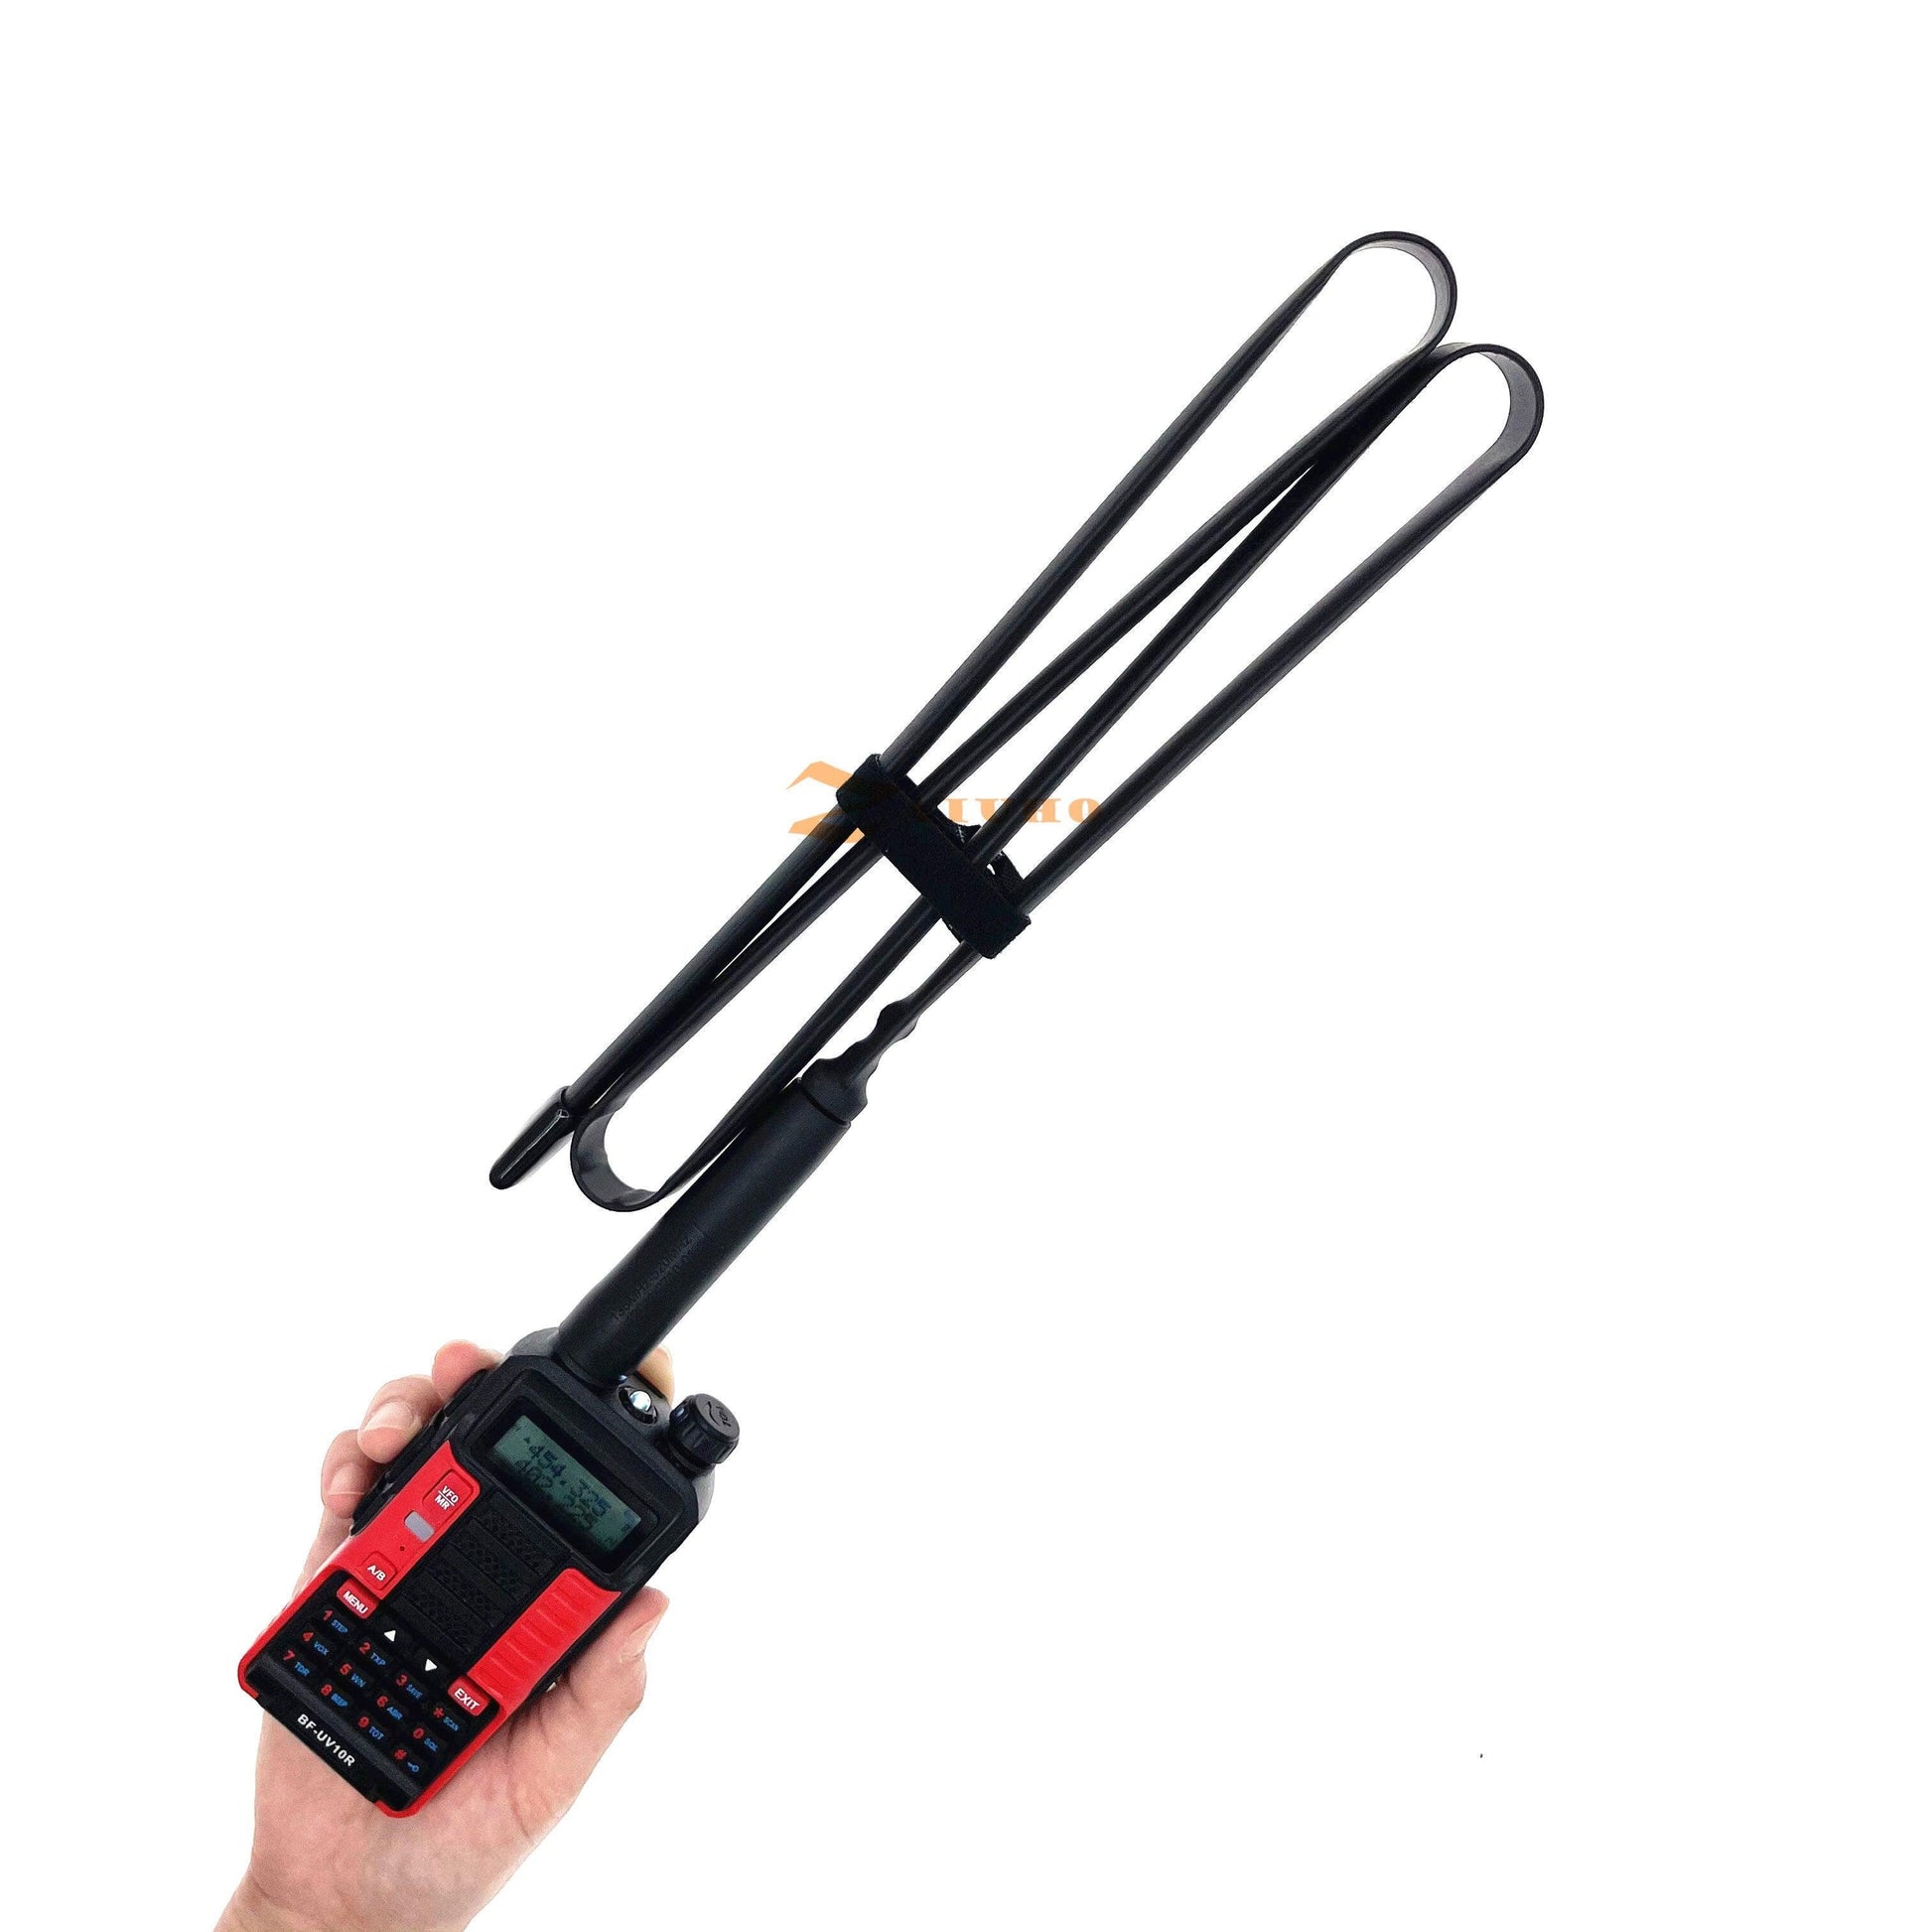 New Tactical SMA-F Foldable Antenna VHF UHF Walkie Talkie Baofeng UV-5R 82 9R Plus antenna BF-888S For CS Hunting Fighting - RCDrone